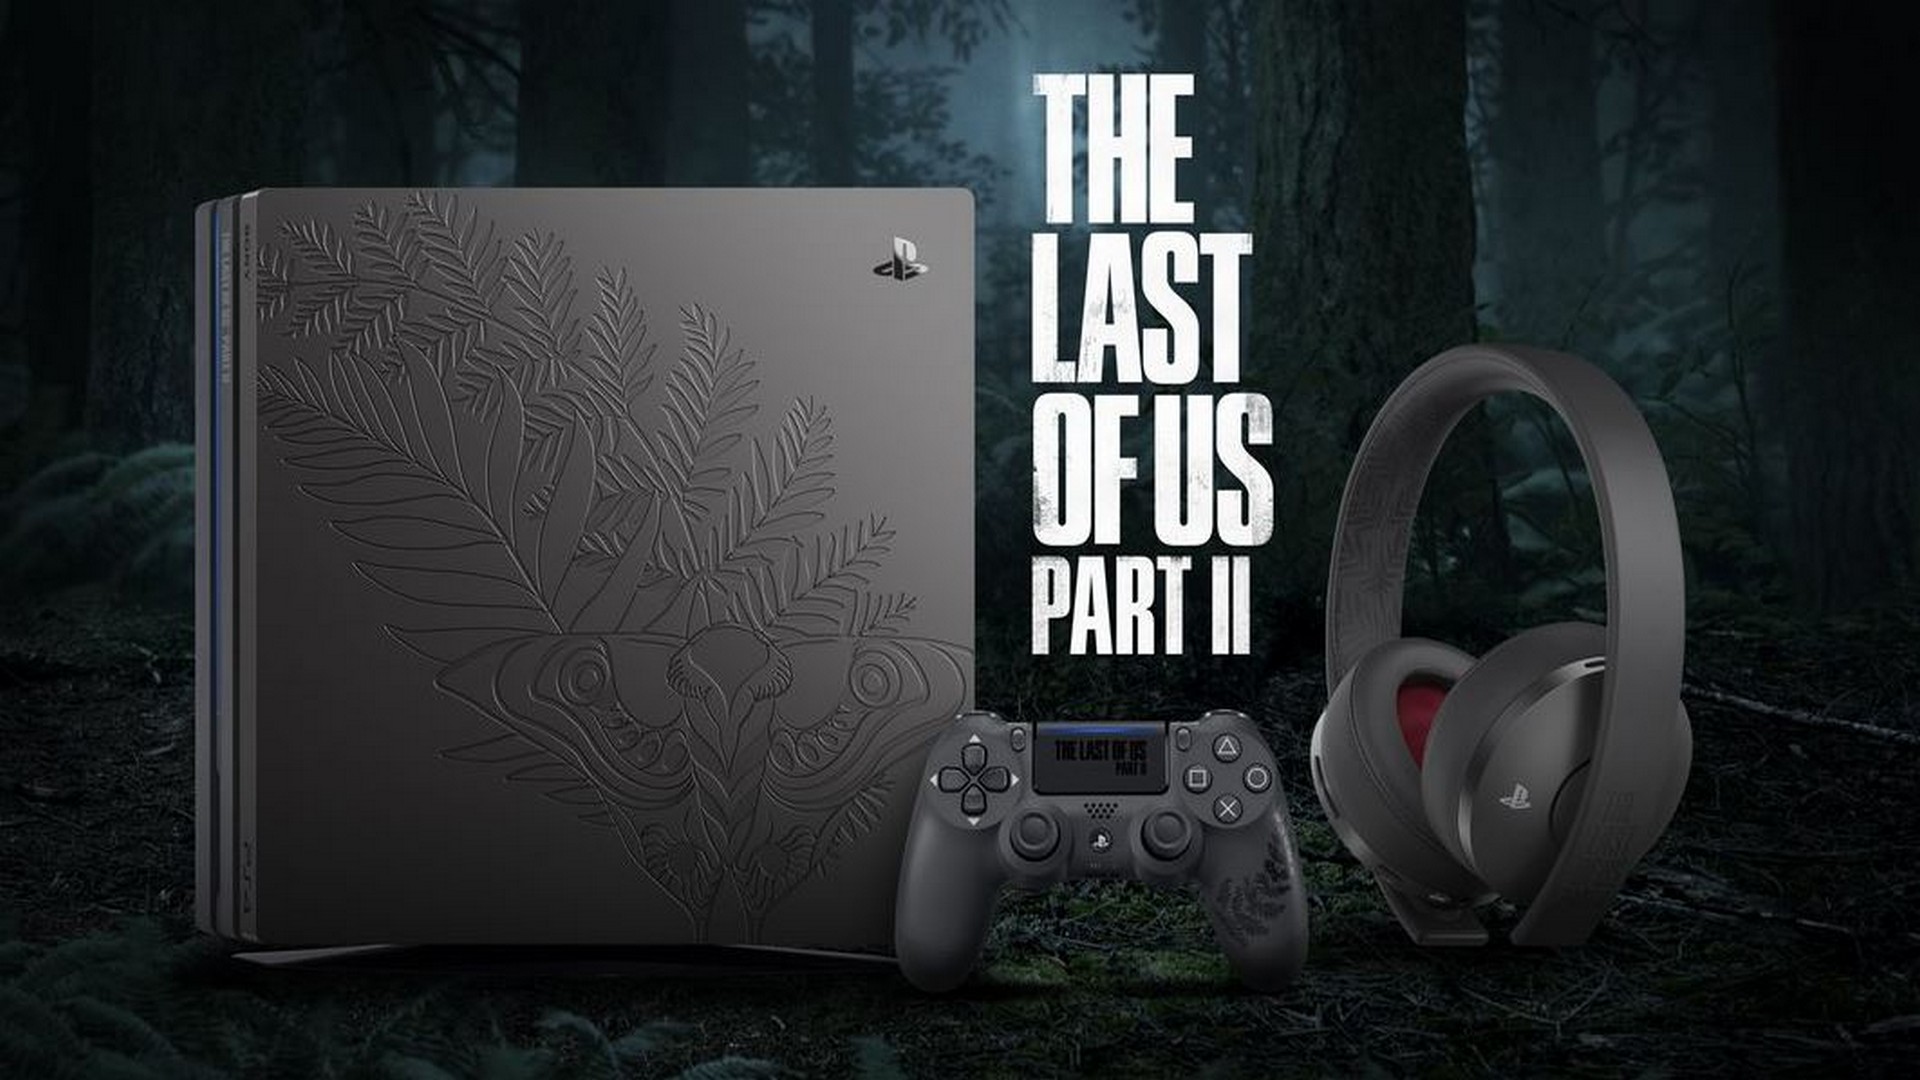 Celebrating The Last of Us Part II With A Limited Edition PS4 Pro